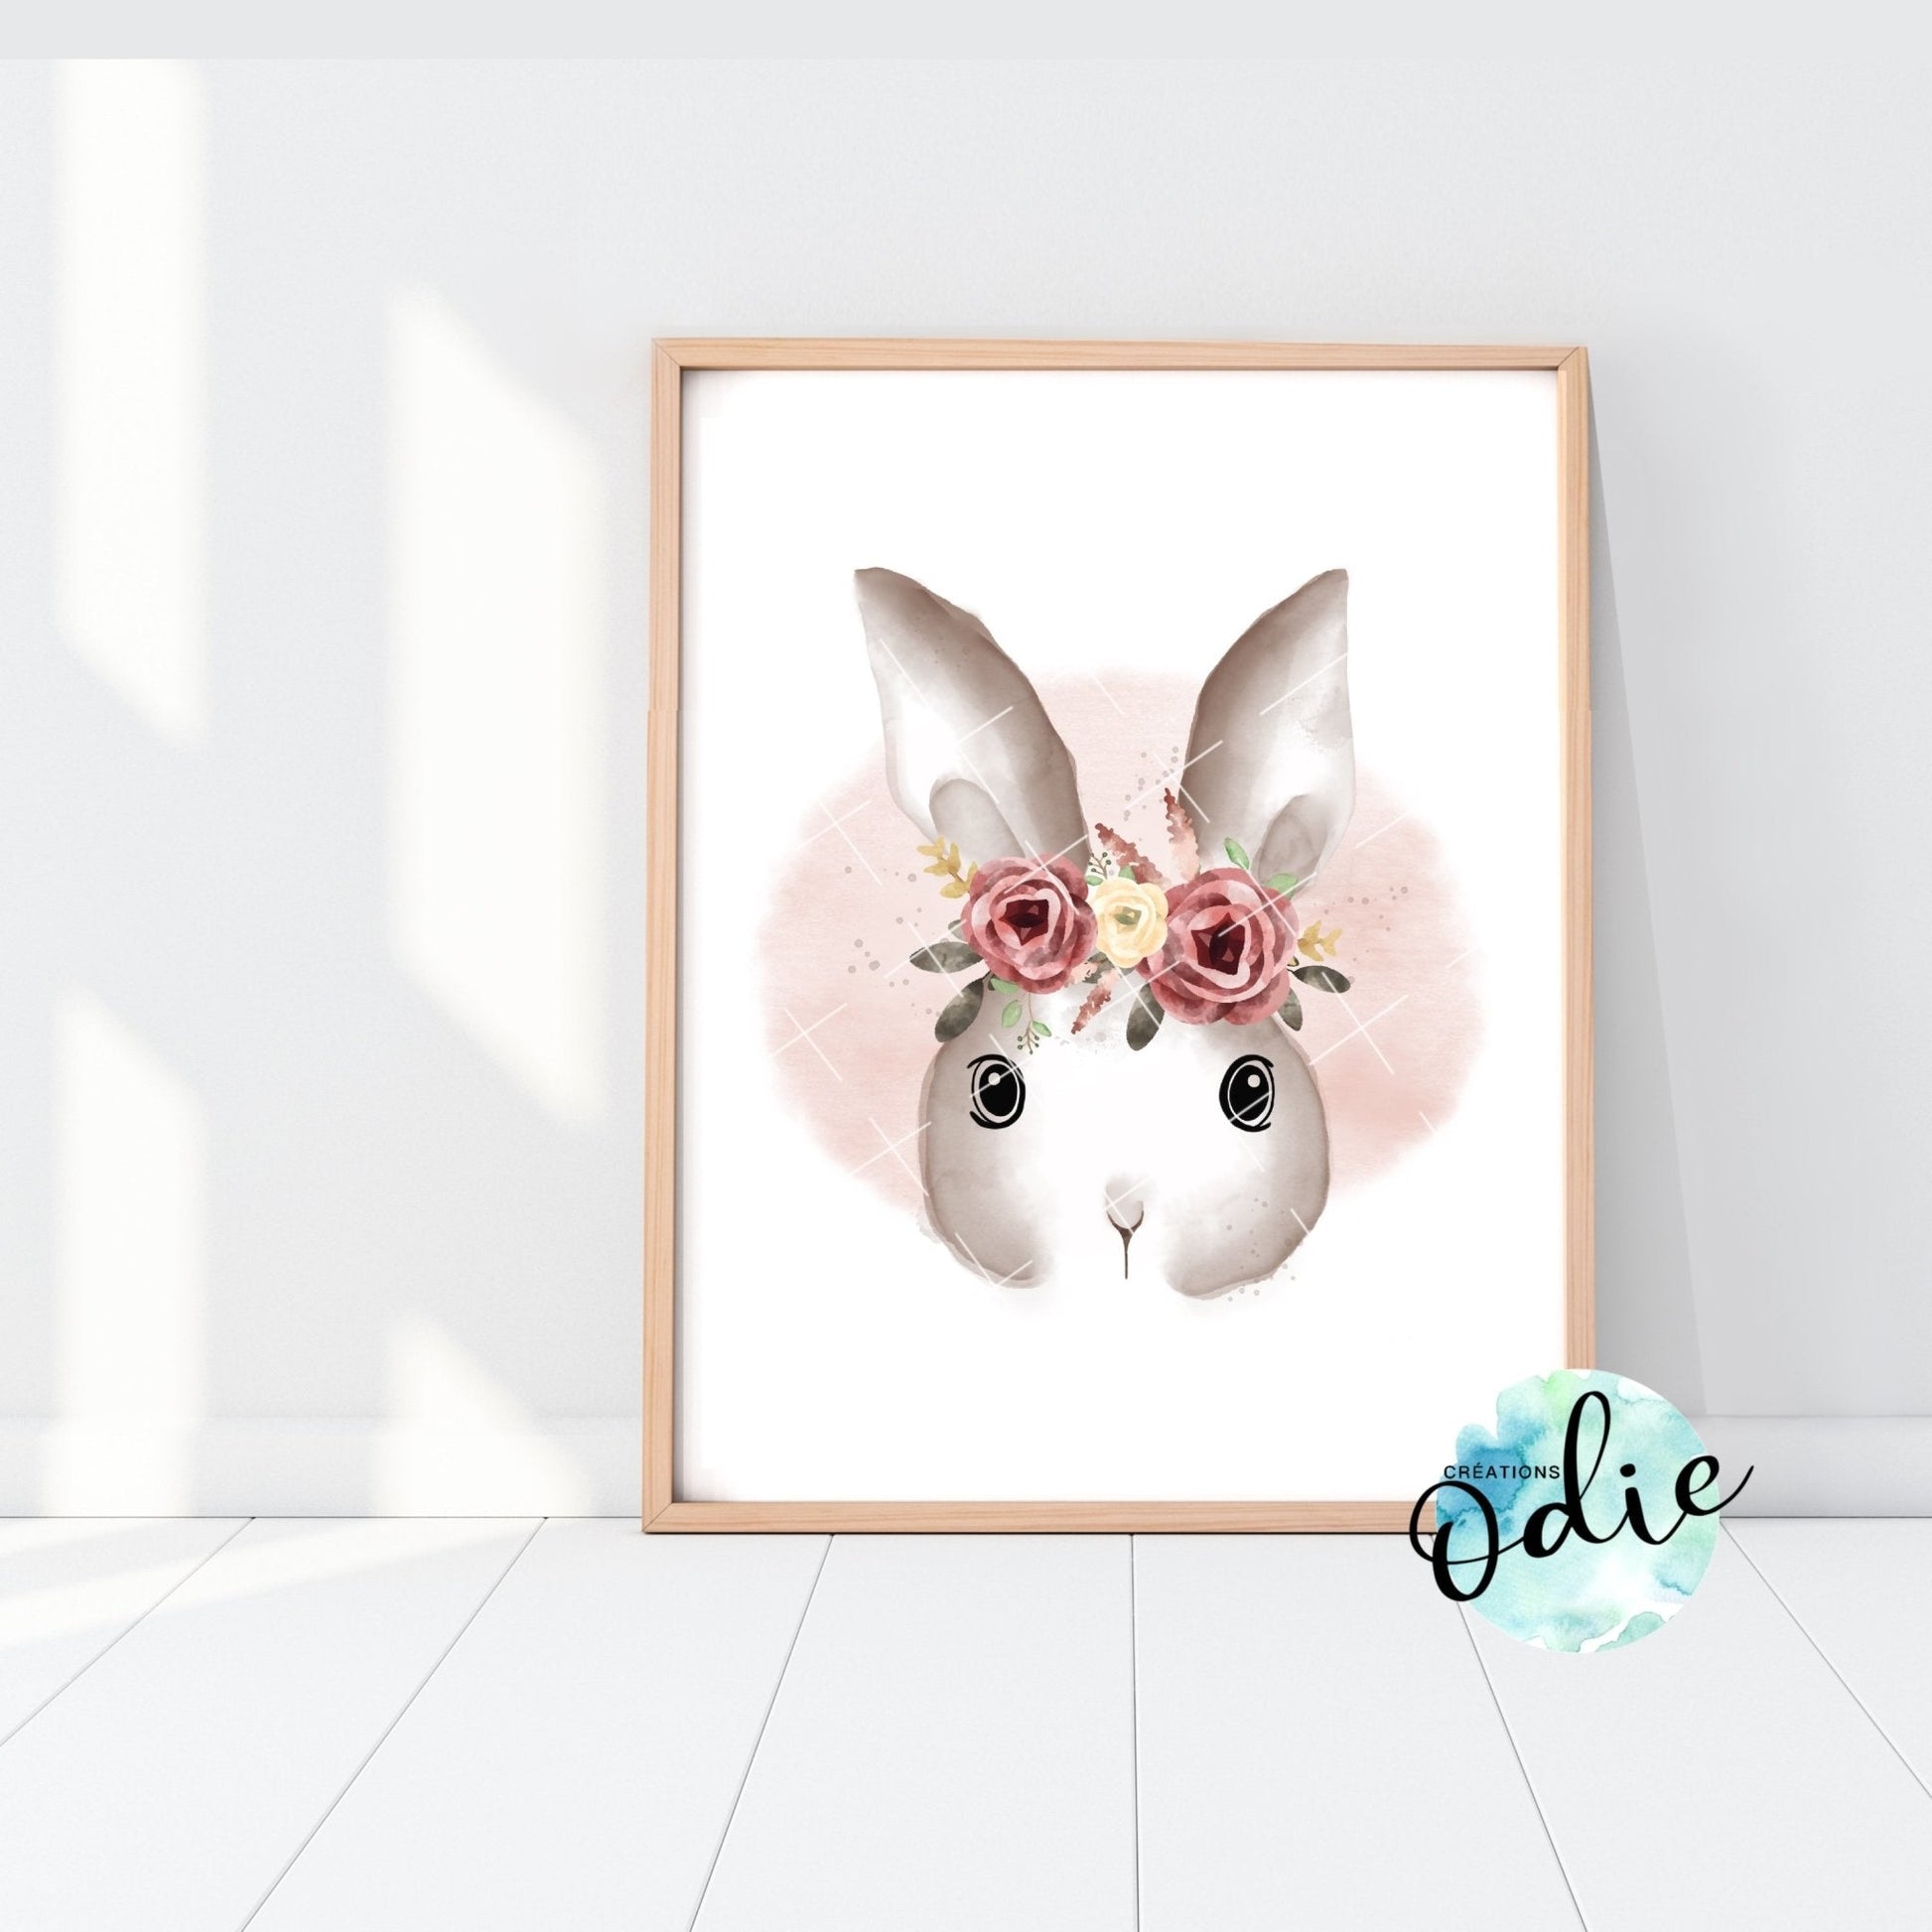 Affiche - Lapinette rose - Affiche - Créations Odie